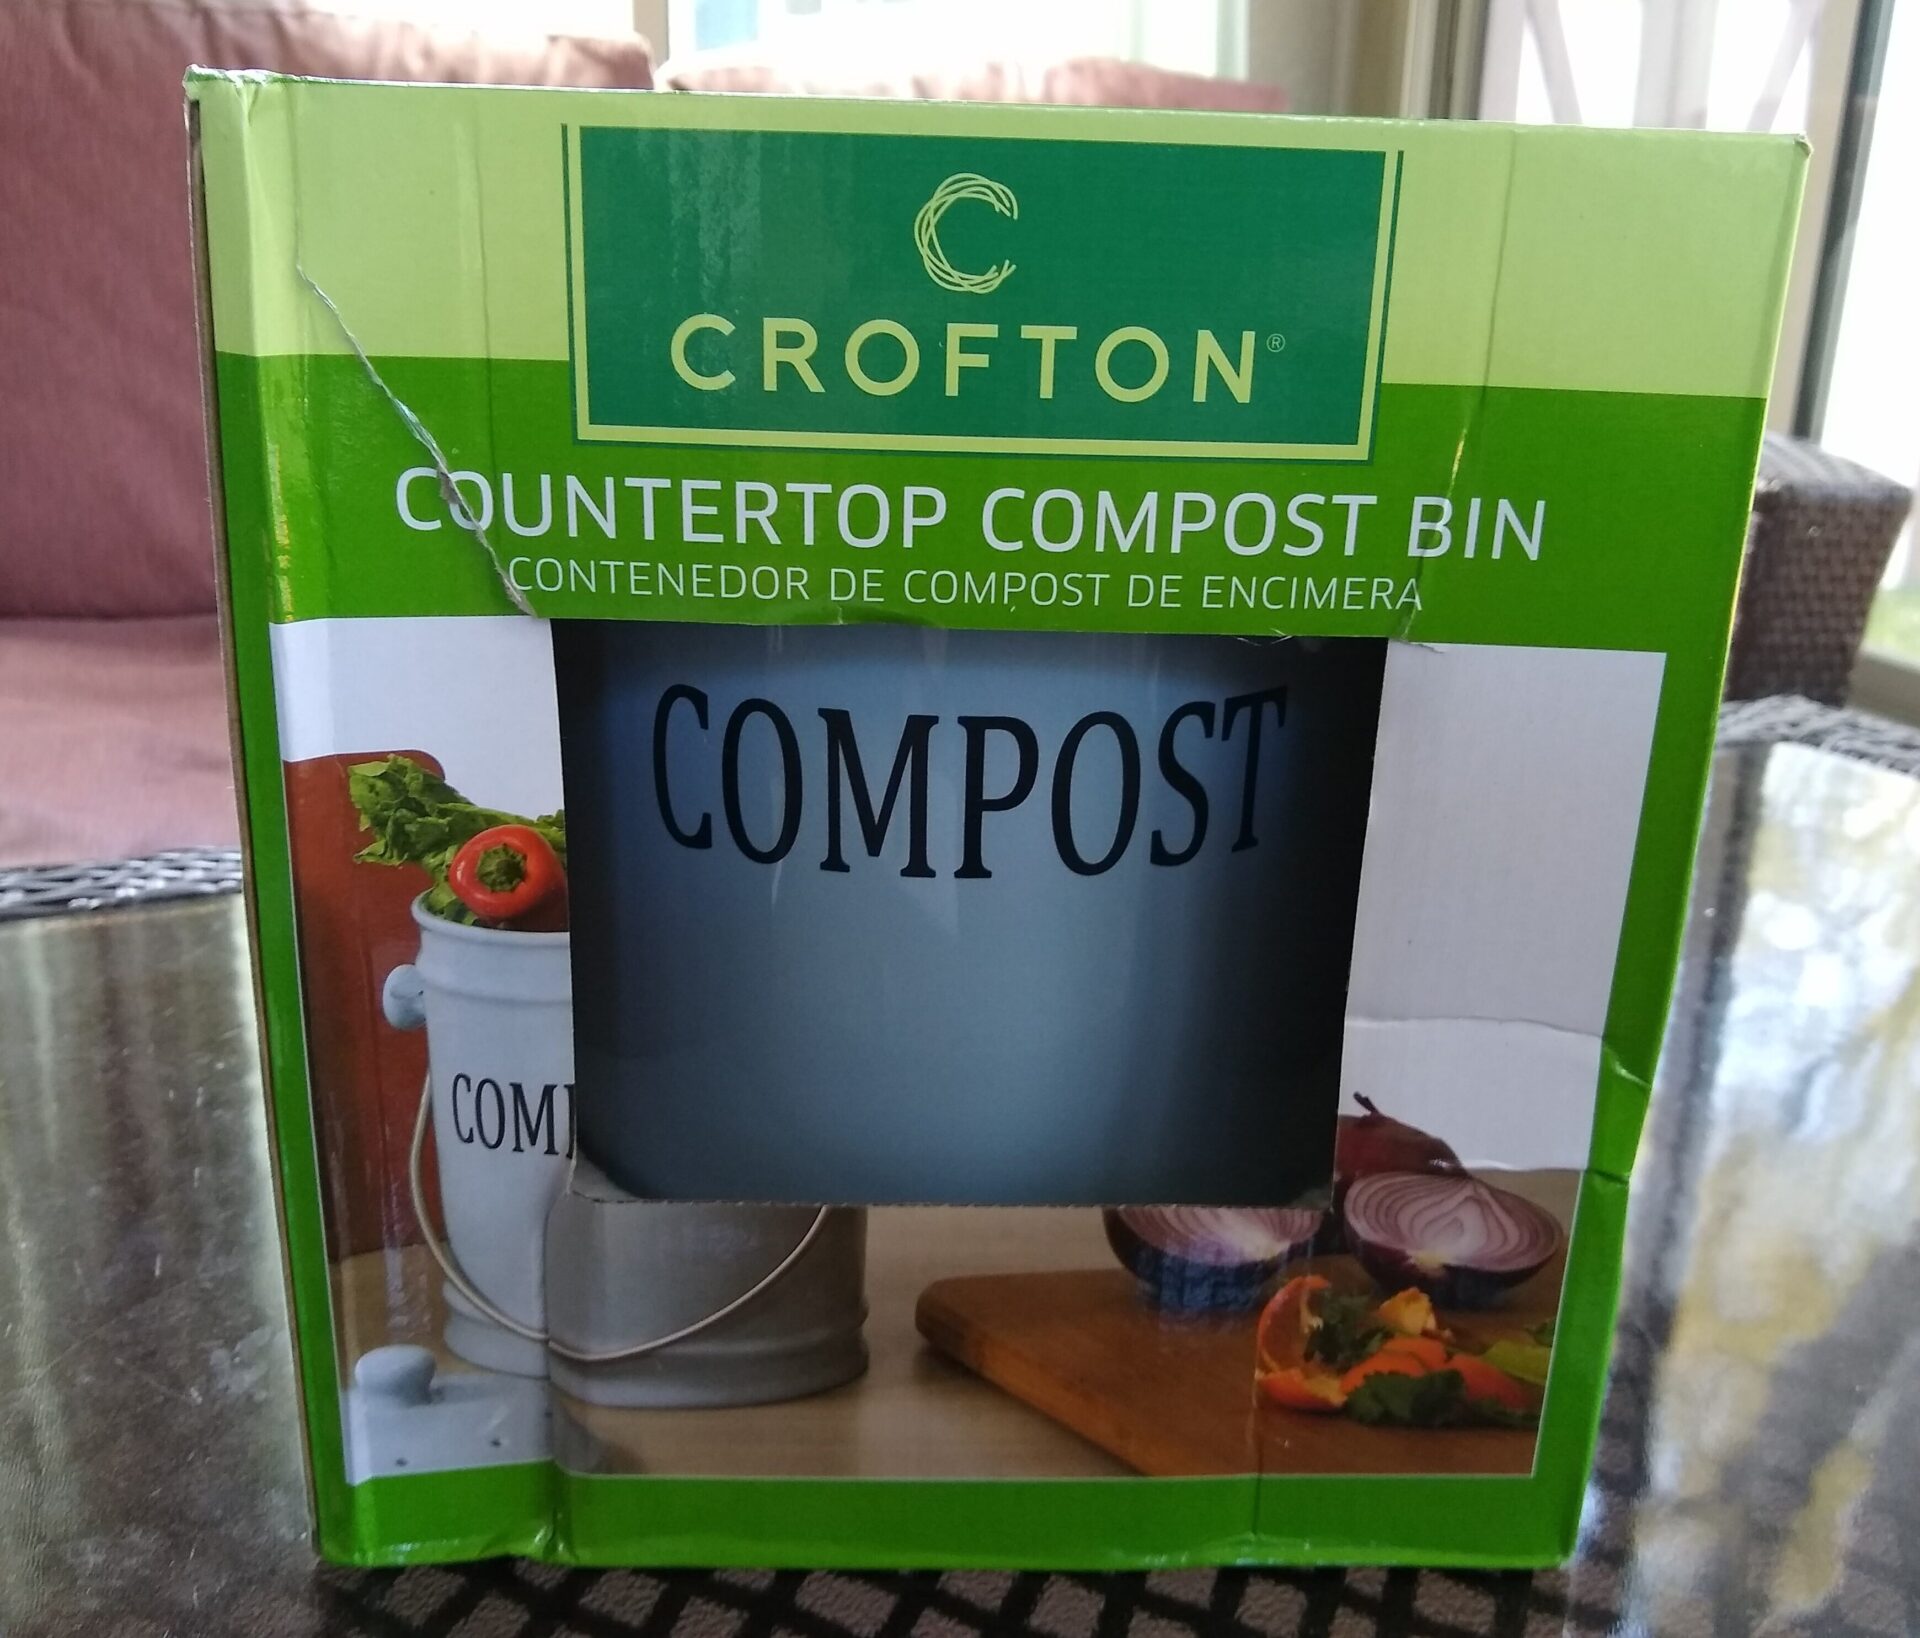 Crofton White & Gold Ceramic Counter Top Compost Bin Handled Pail w/Filters  Bags